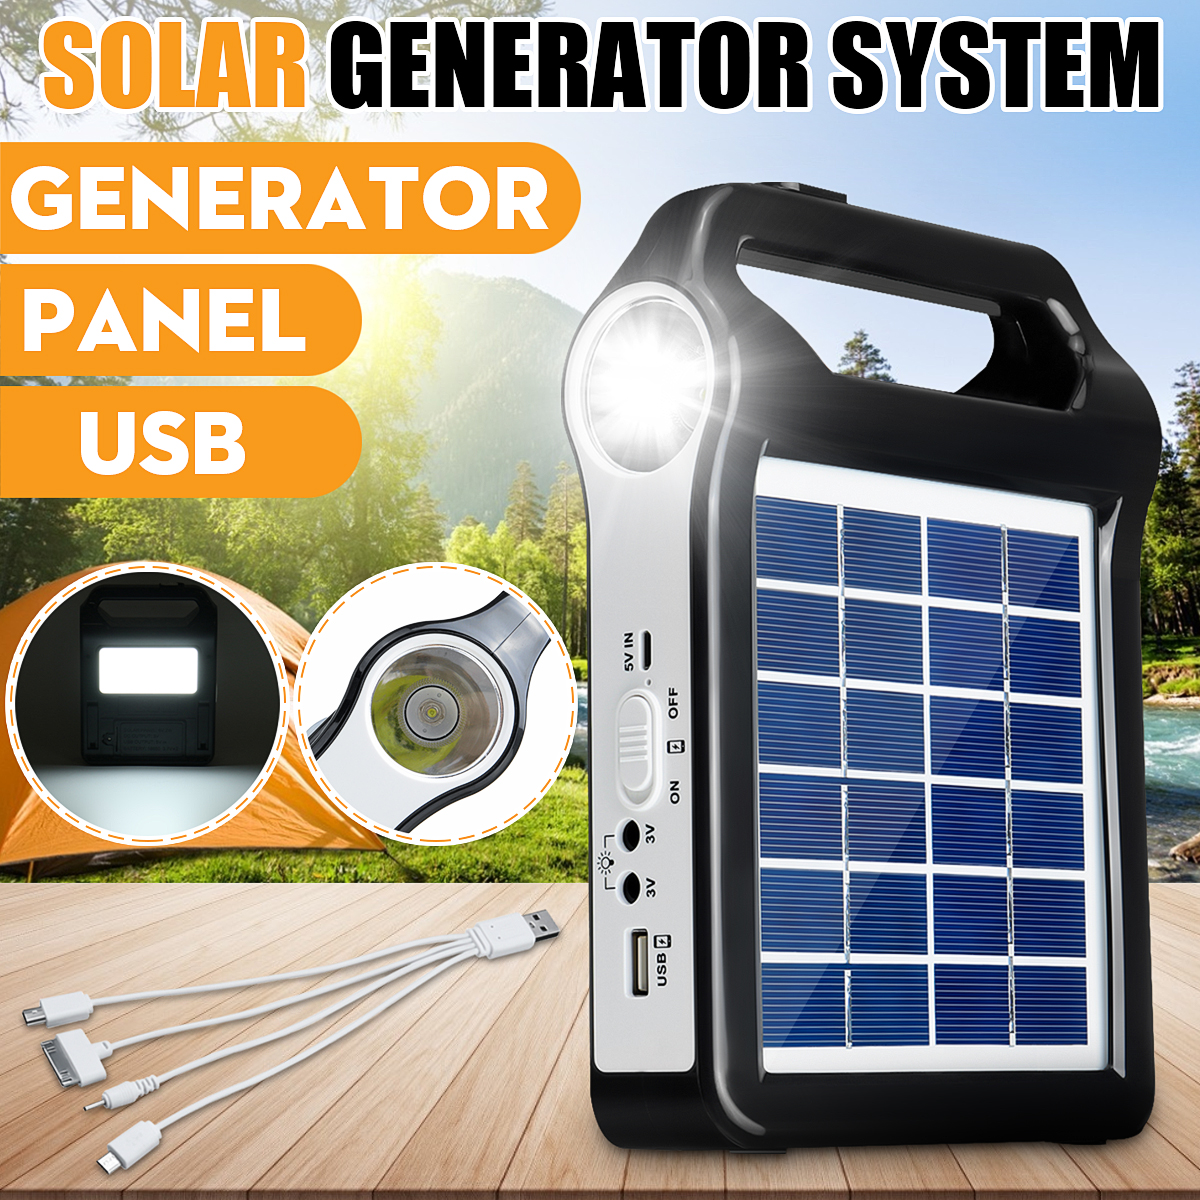 Solar Lights Indoor Home, 9W Solar Panel, Cell Phone Charger, 2400mAh ...